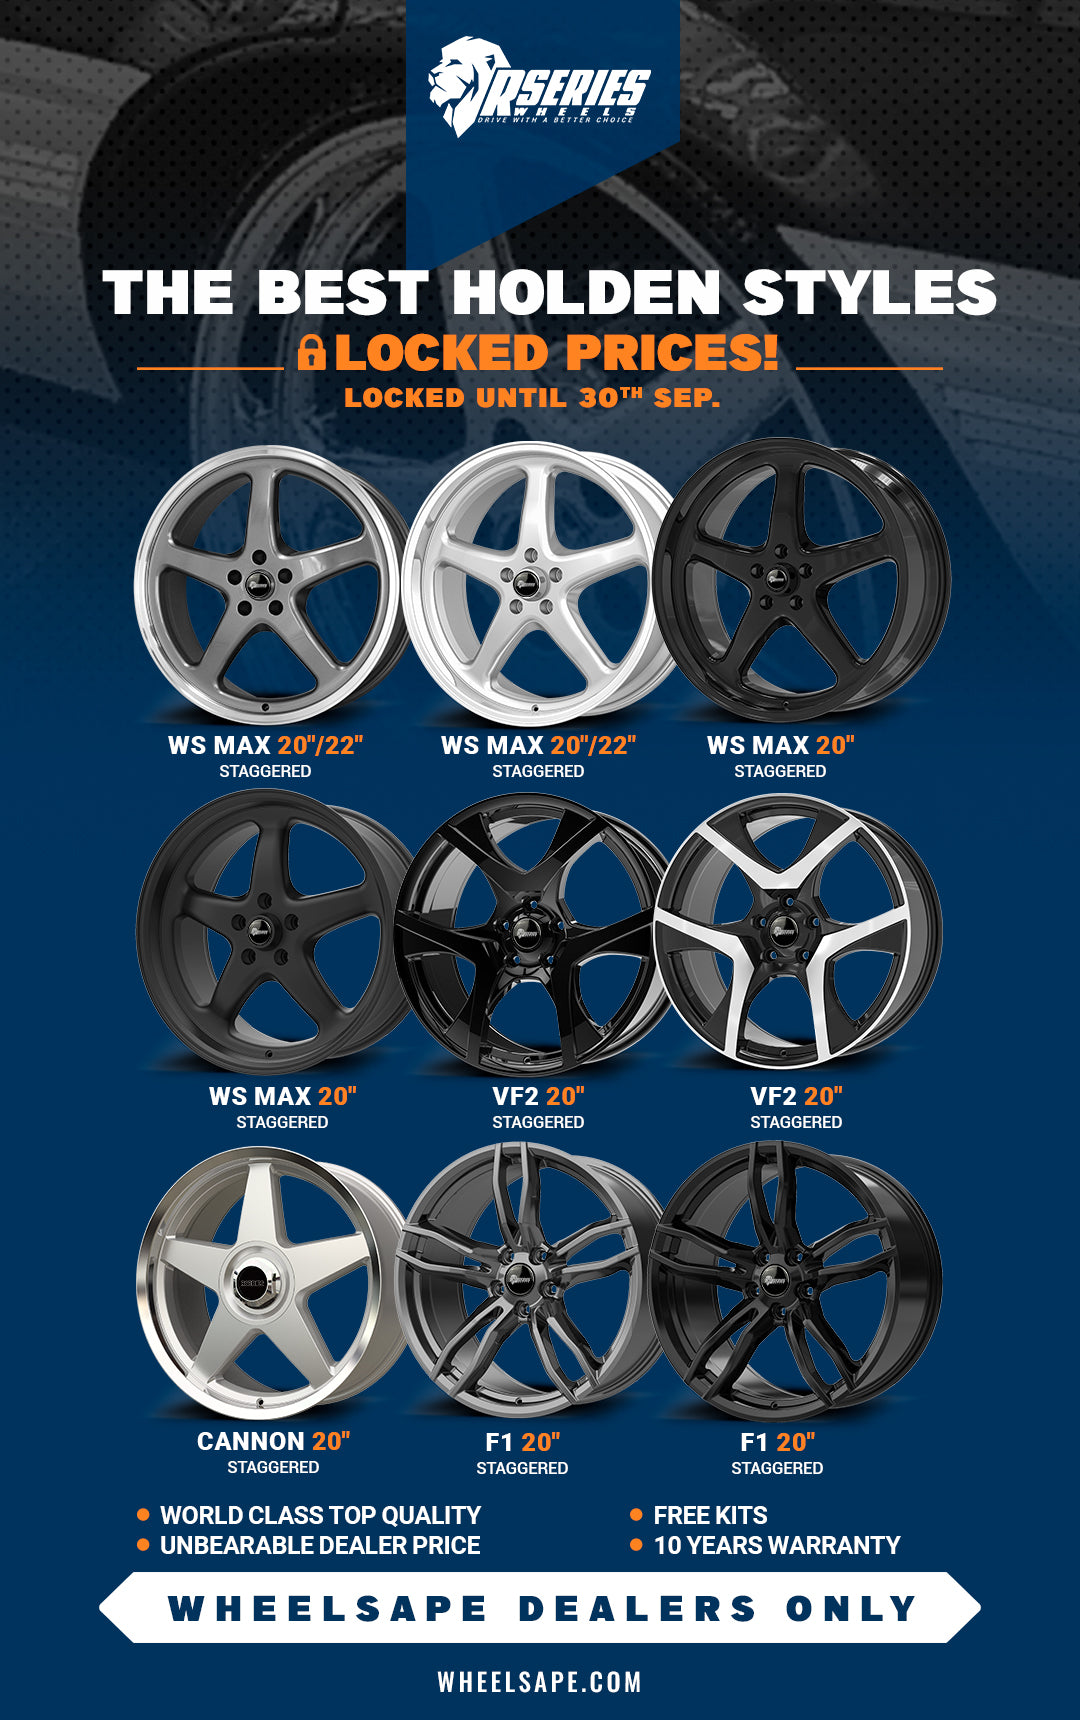 Rseries - The Best Holden Style Wheels Price Locked!